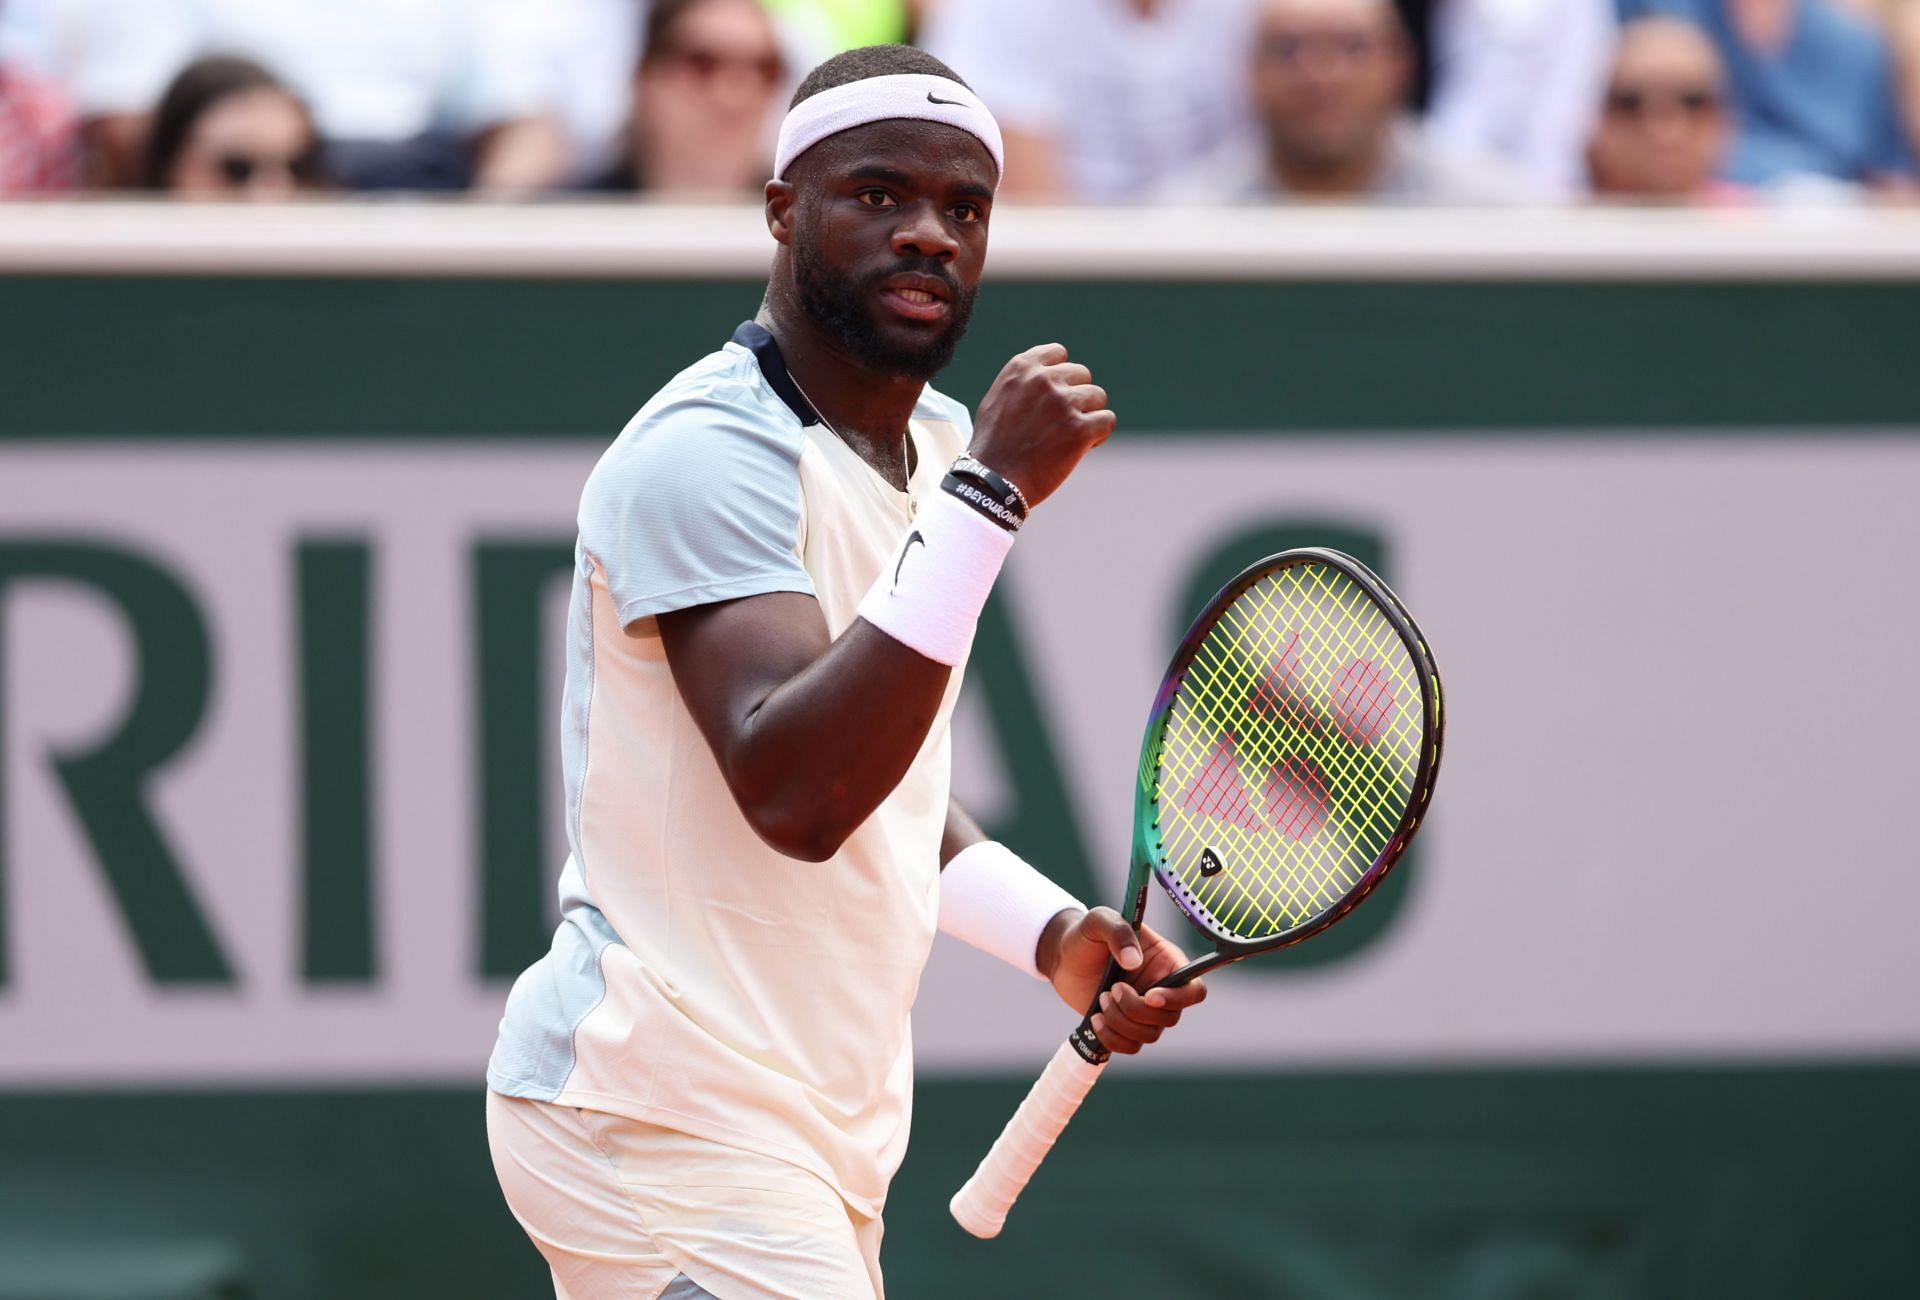 Frances Tiafoe at the 2022 French Open.